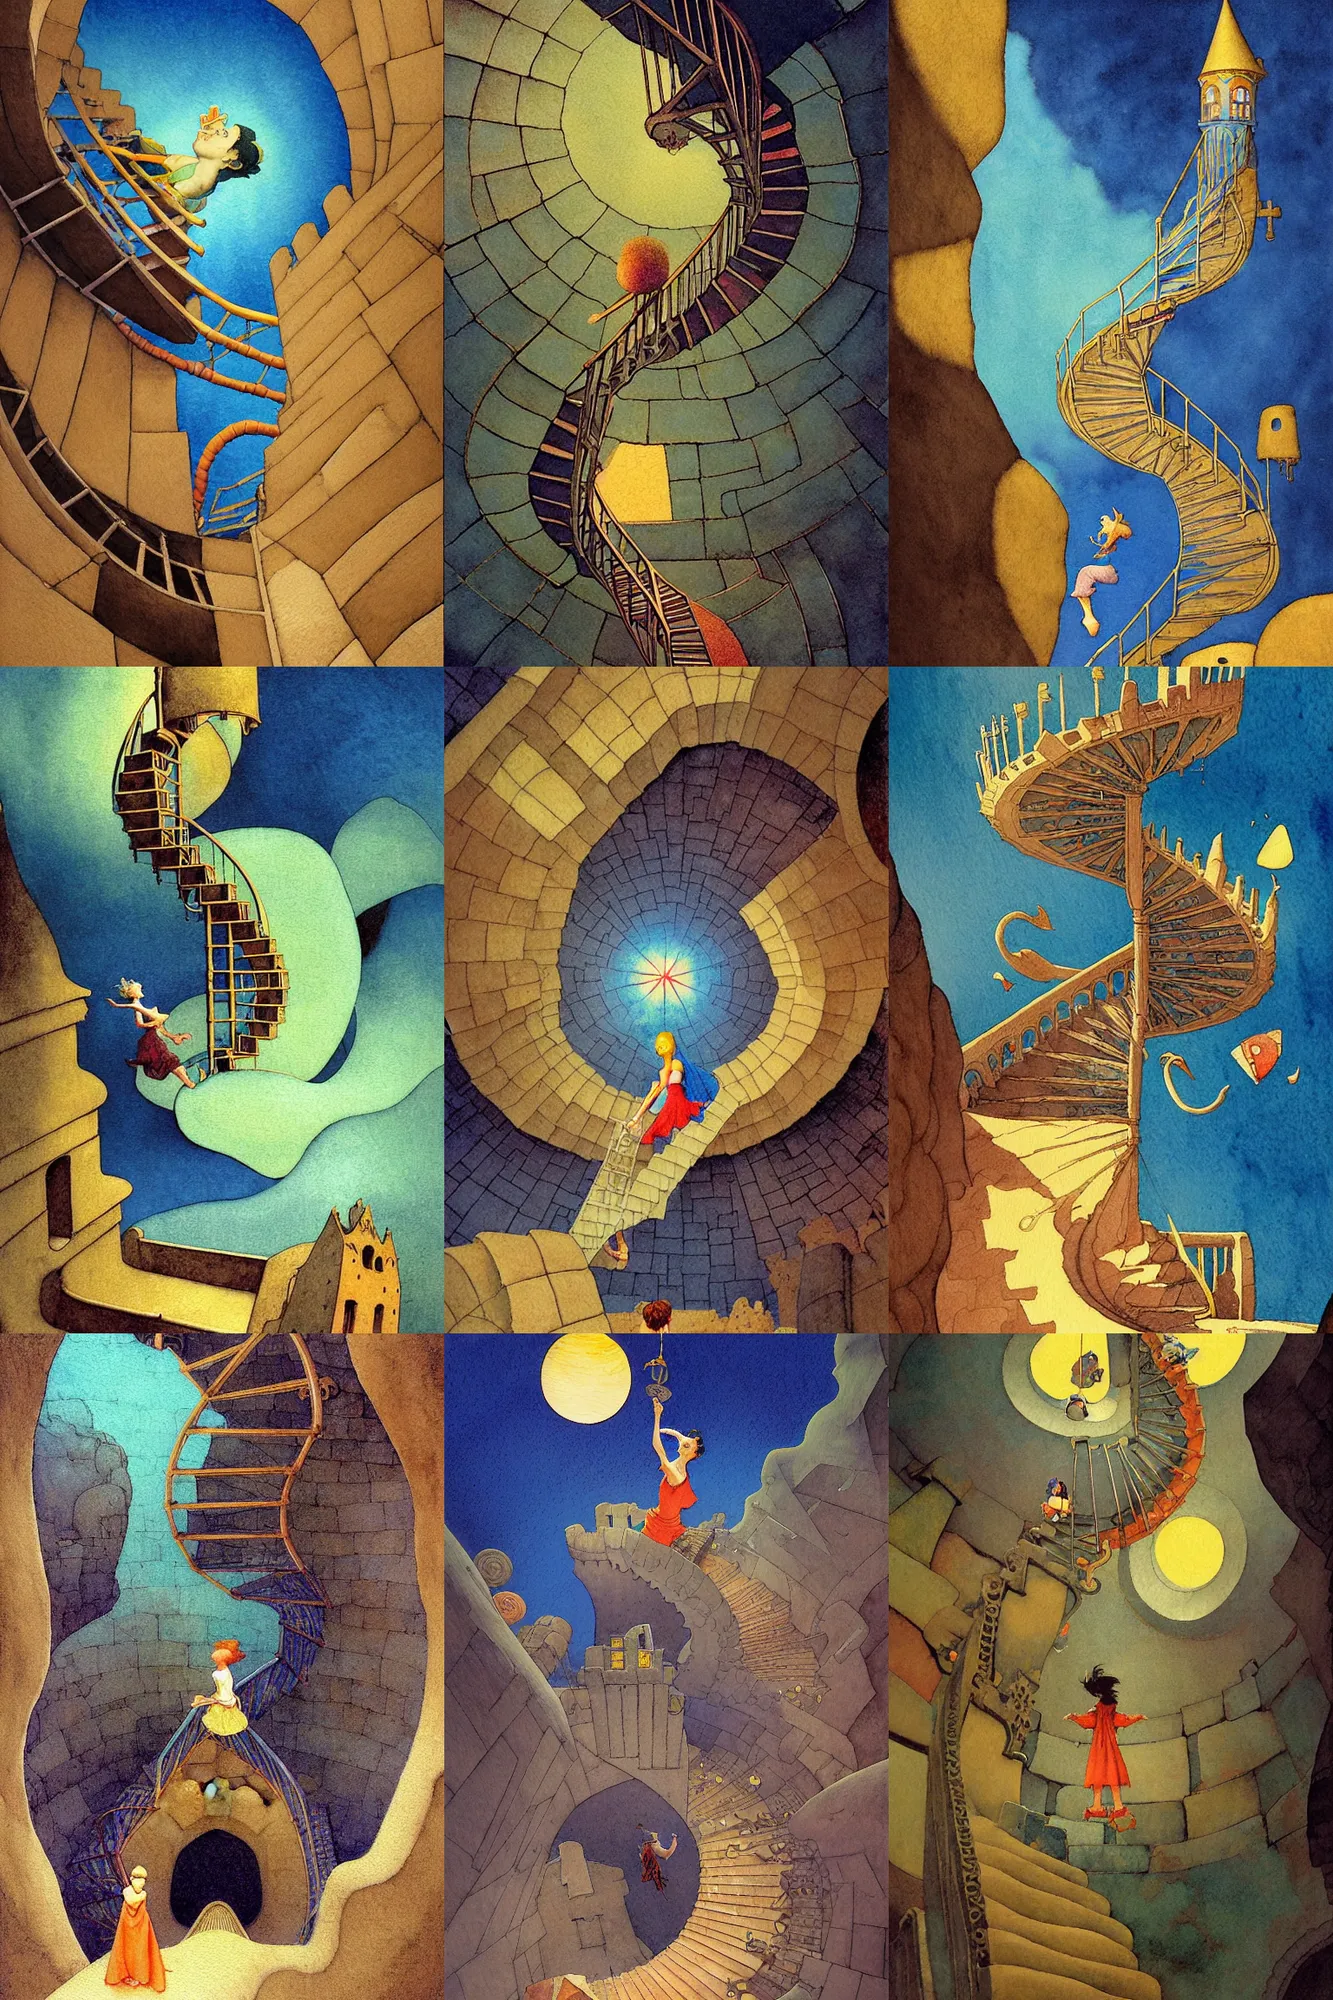 Prompt: dixit card, inside the sand castle, focal point, character chasing, chased, dark fantasy, looking down the spiral staircase, vertigo, fear of heights, dizzying, intricate, amazing composition, colorful watercolor, by ruan jia, by maxfield parrish, by shaun tan, by nc wyeth, by michael whelan, by escher, illustration, gravity rush, volumetric